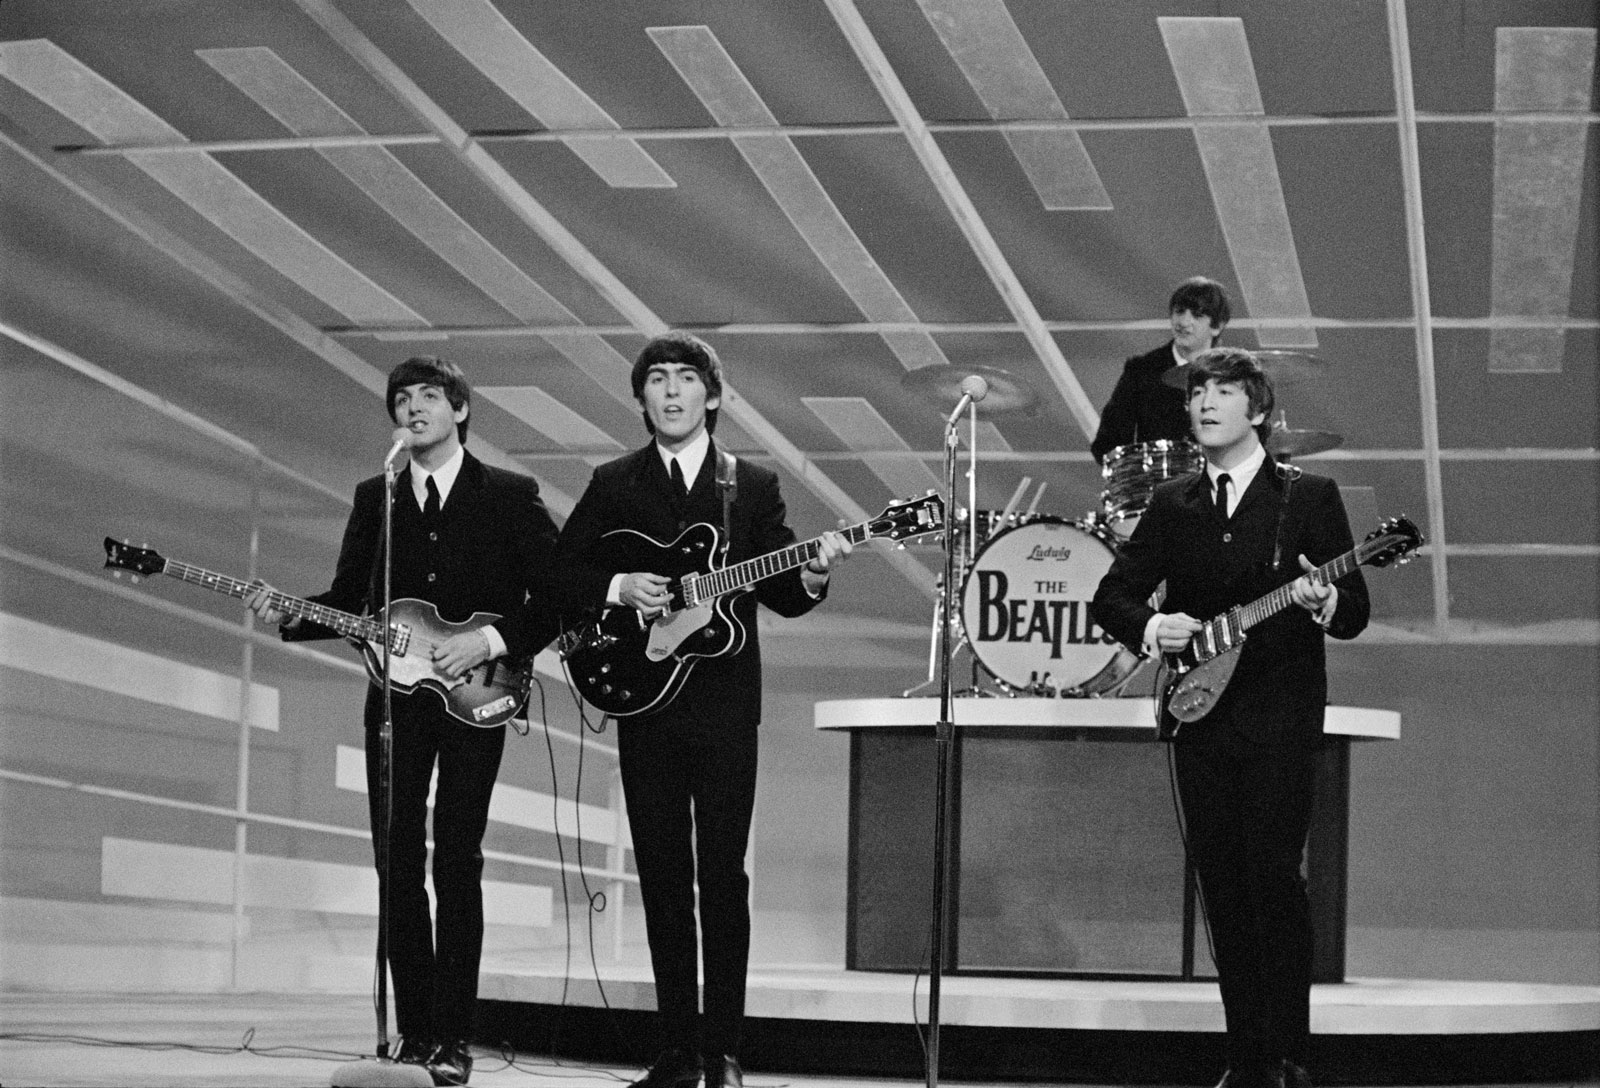 The Beatles on Ed Sullivan. Recovery and healing can come in unexpected ways, including The Beatles. Writer Iris Dorbian explains.